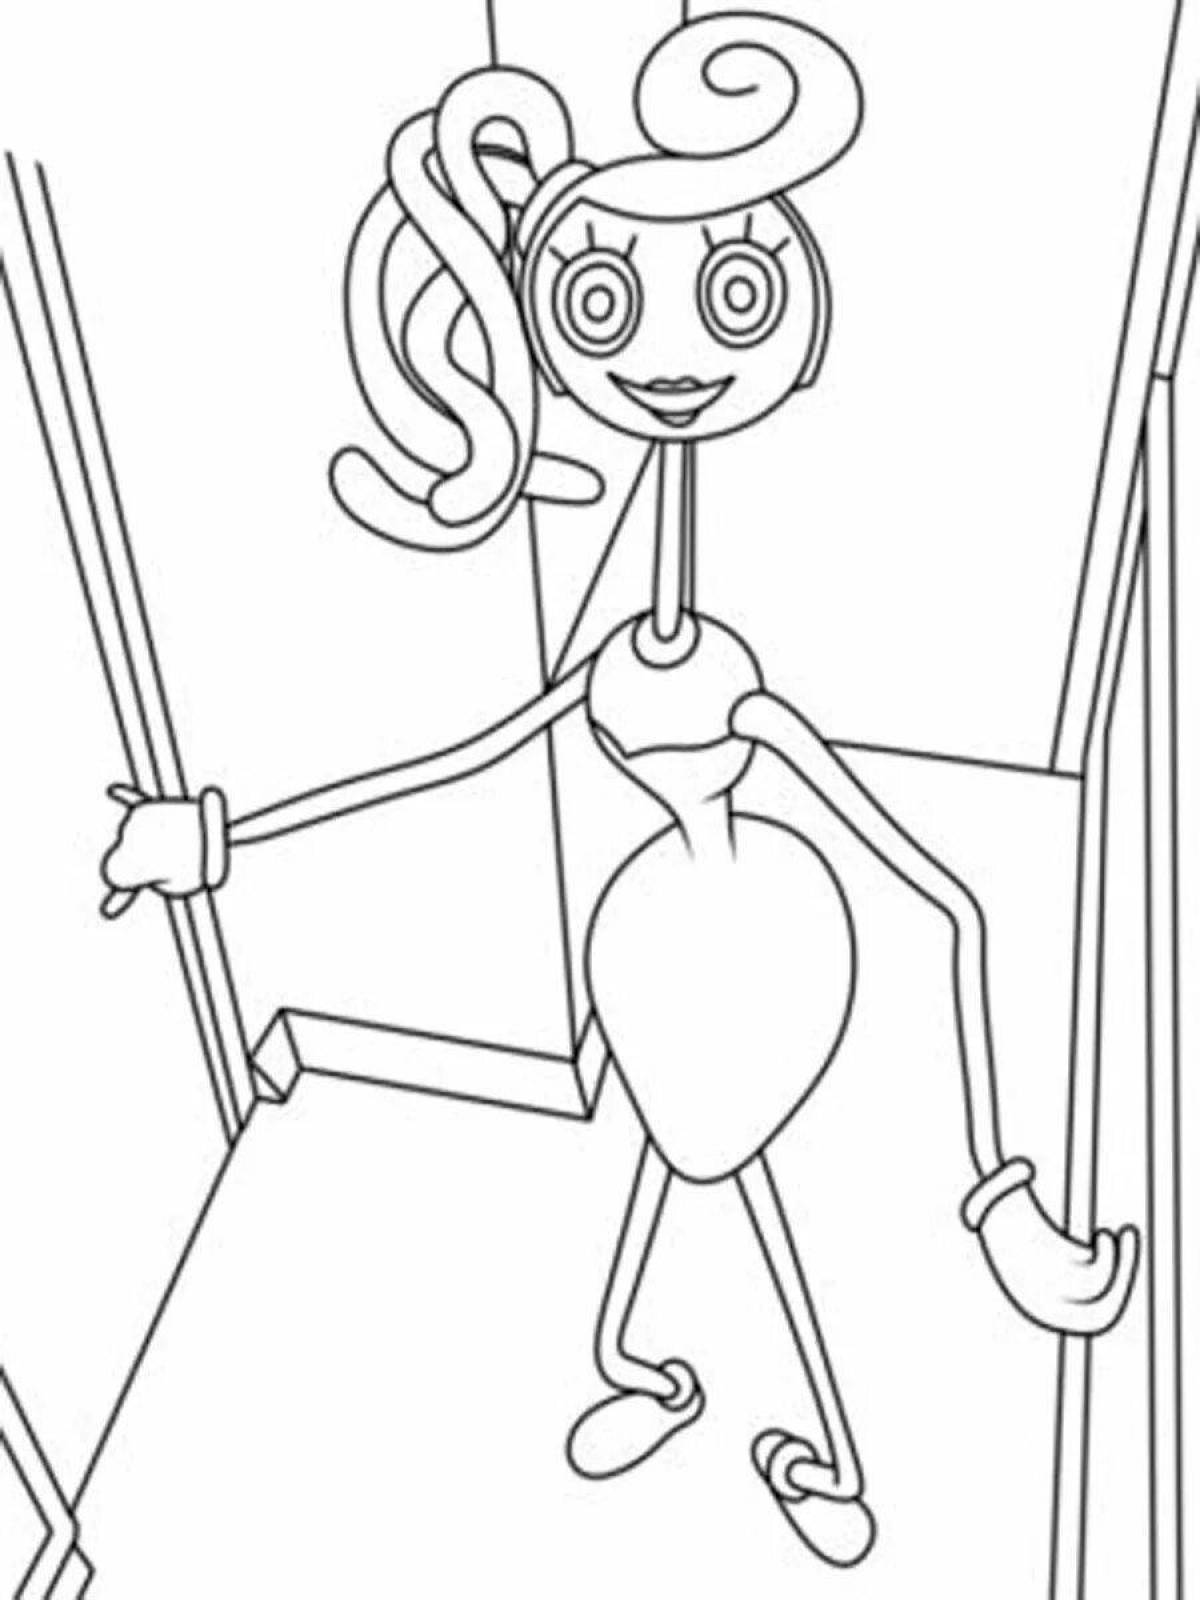 Coloring page joyful mommy with long legs